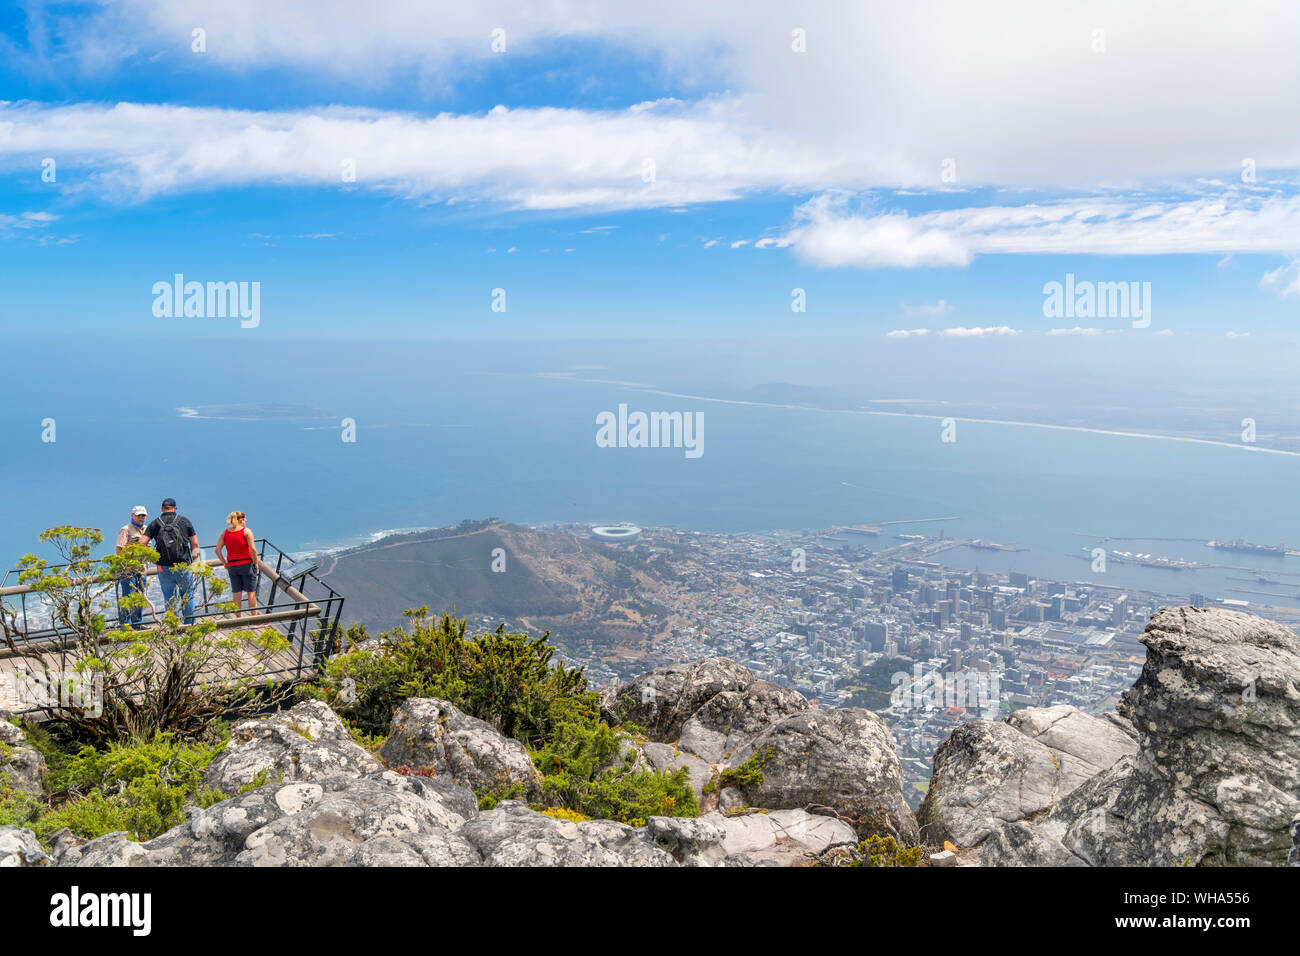 Tourists at a viewpoint on Table Mountain looking west over the city and ocean, Cape Town, Western Cape, South Africa Stock Photo